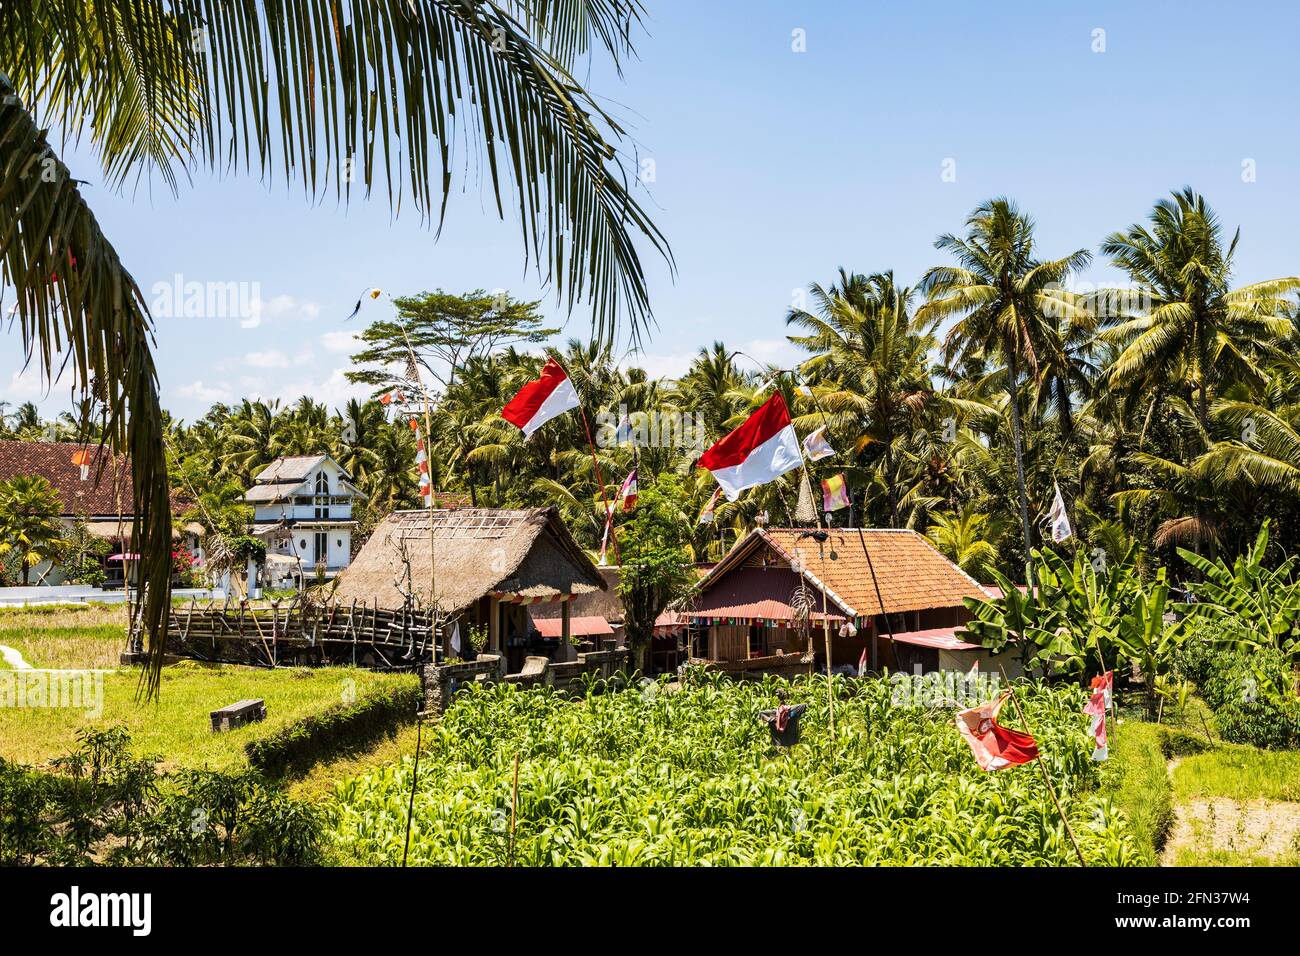 Indonesian flags in agricultural area in Ubud, Bali, Indonesia, Southeast Asia, Asia Stock Photo